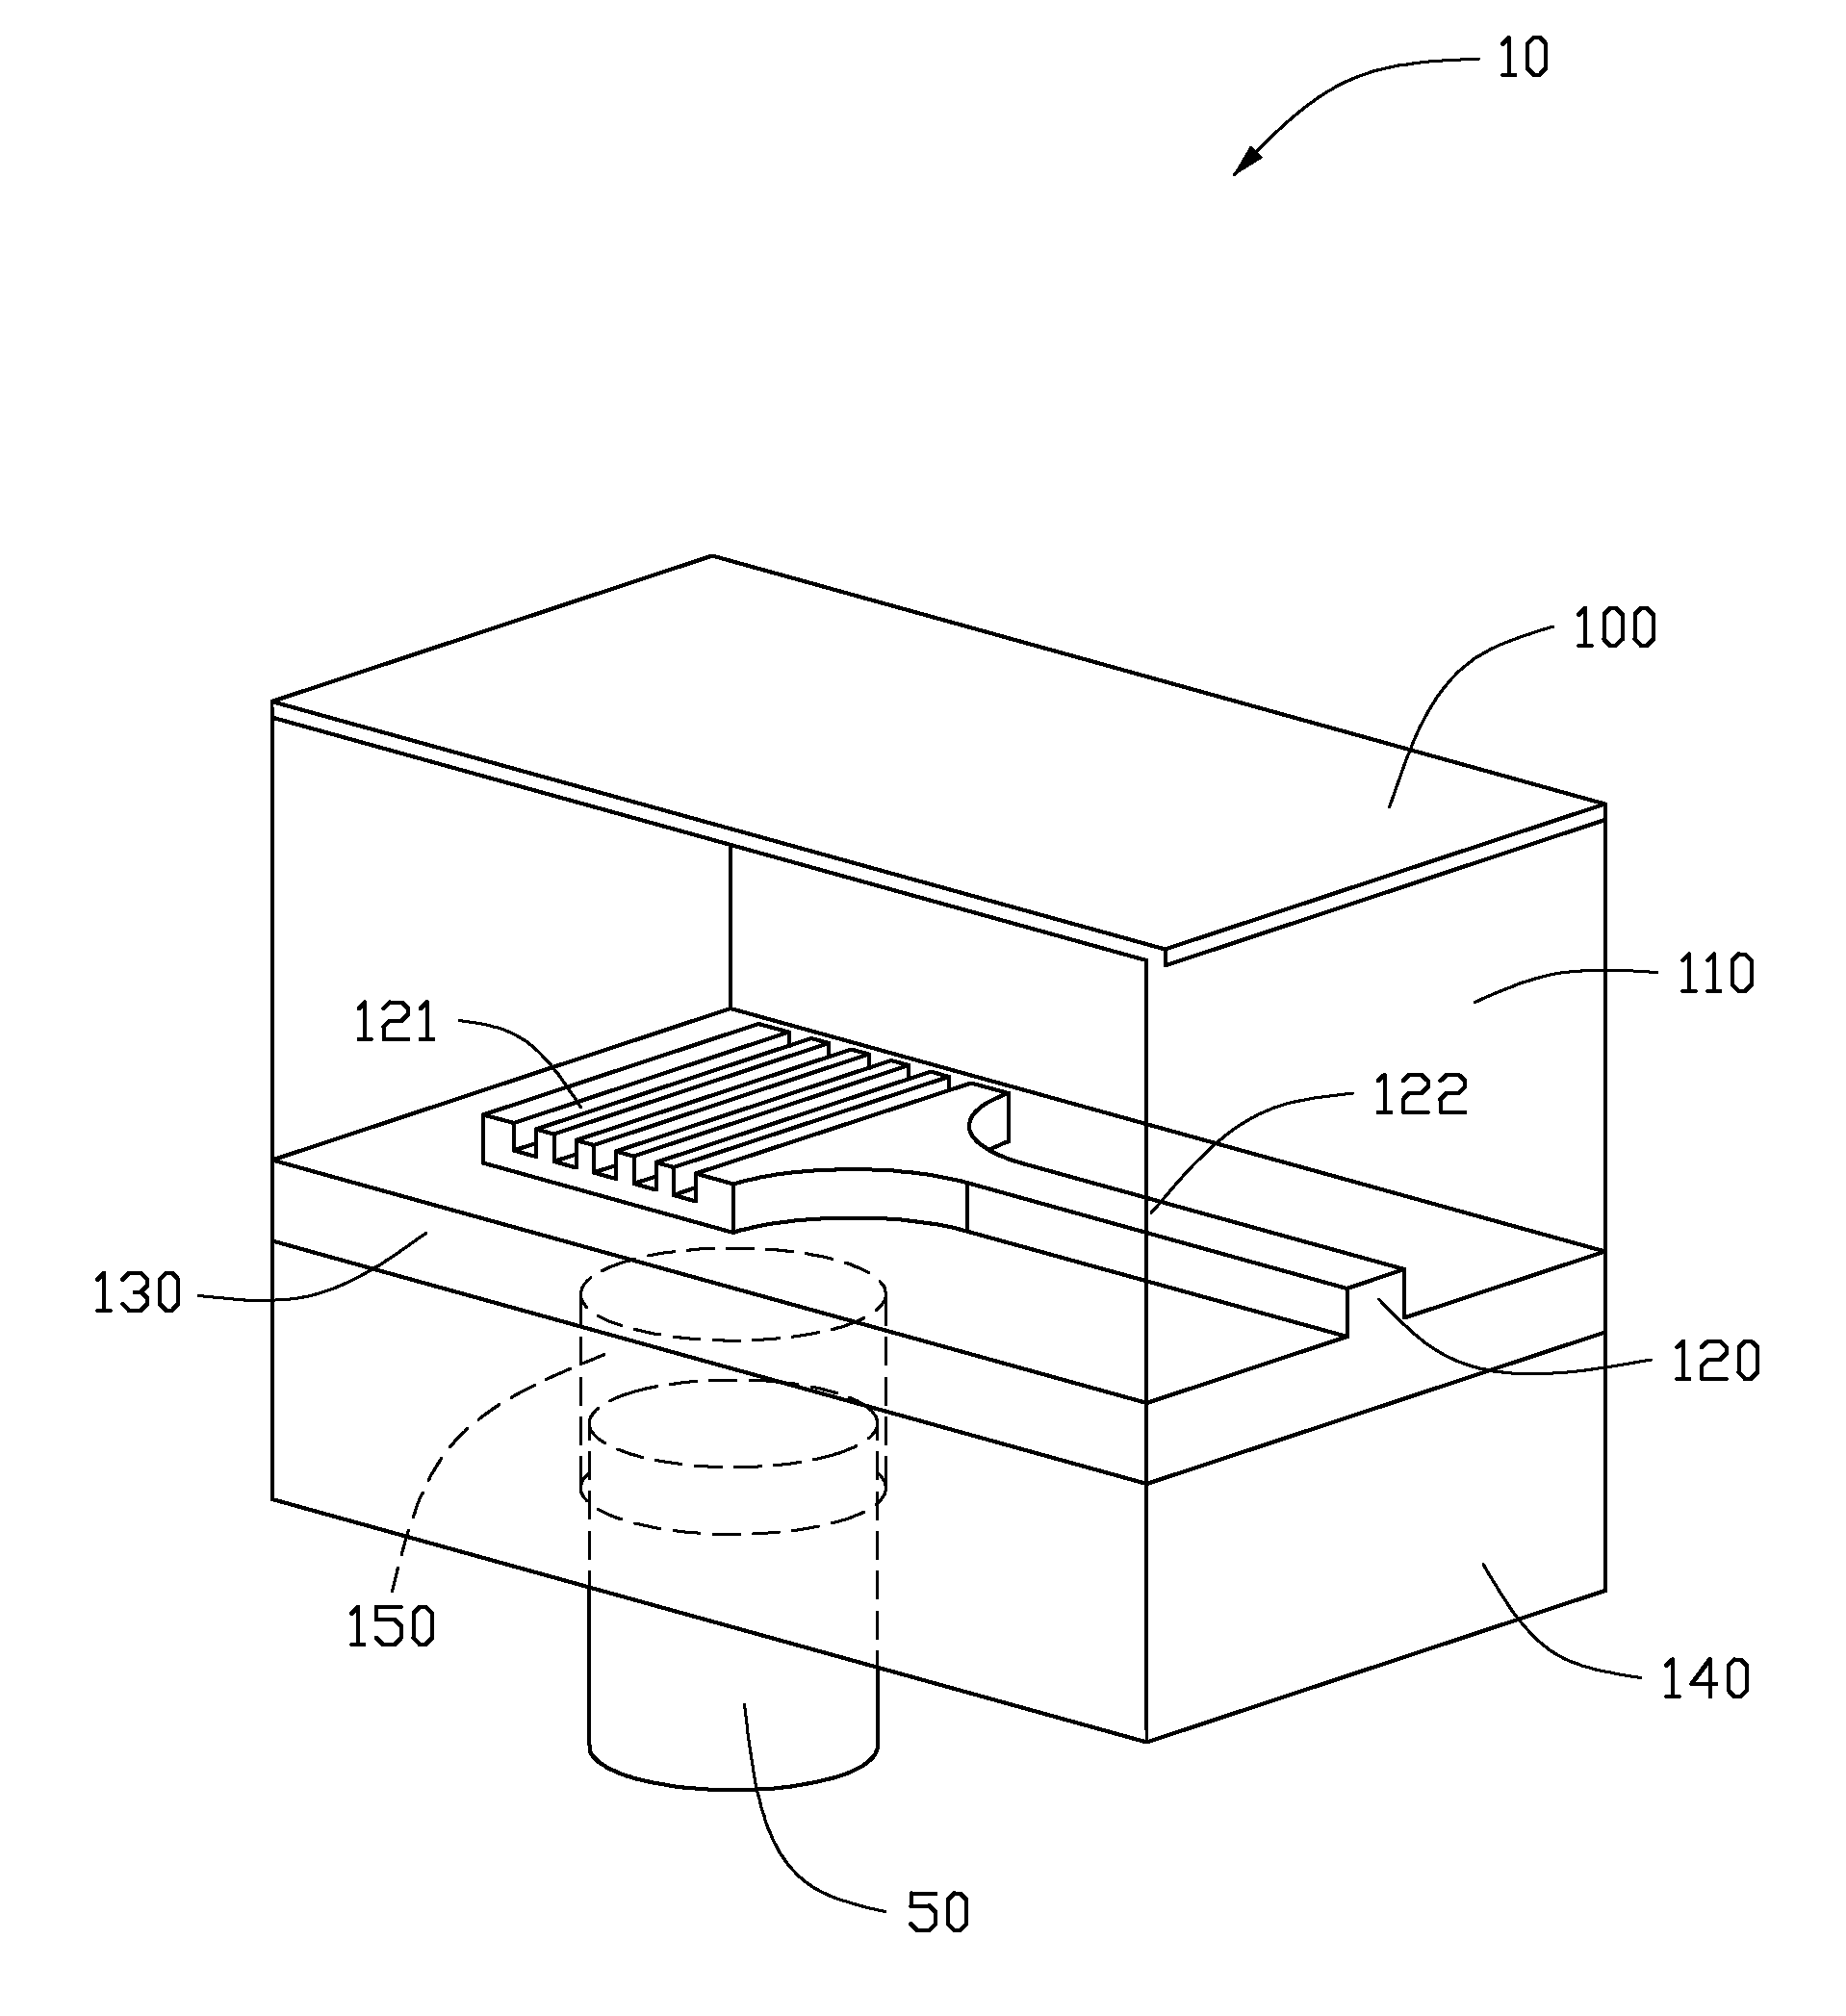 Grating coupler and package structure incorporating the same